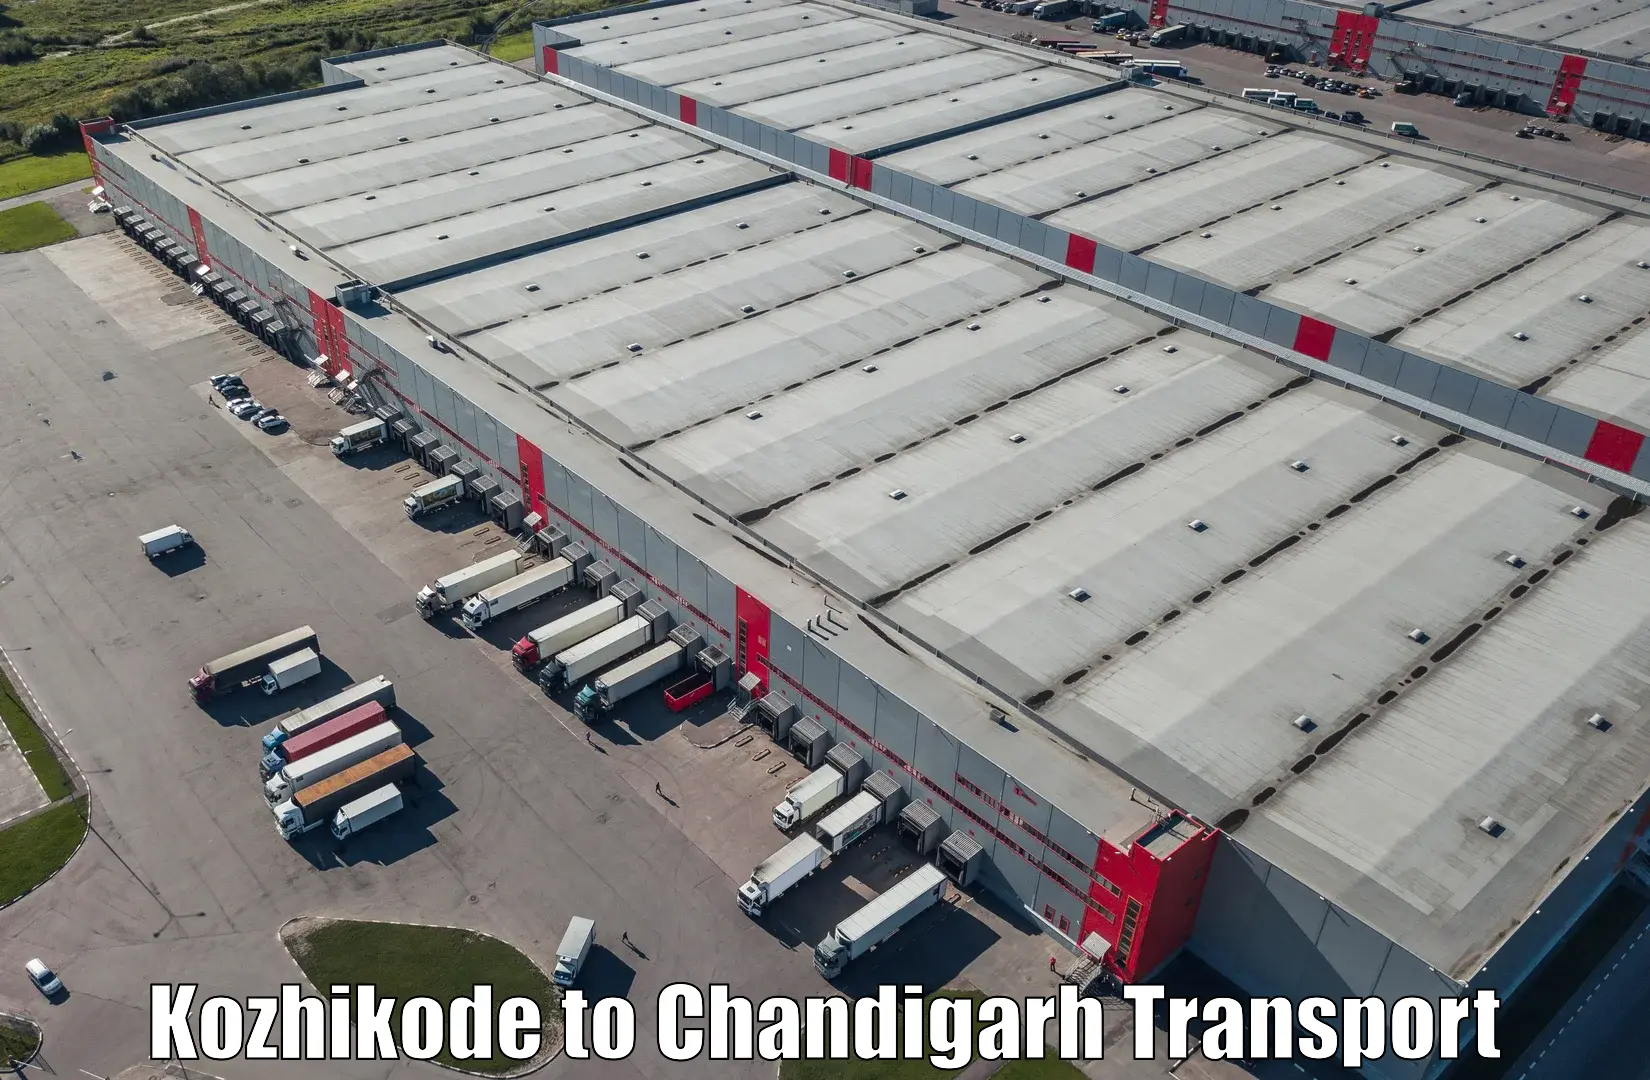 Commercial transport service Kozhikode to Chandigarh